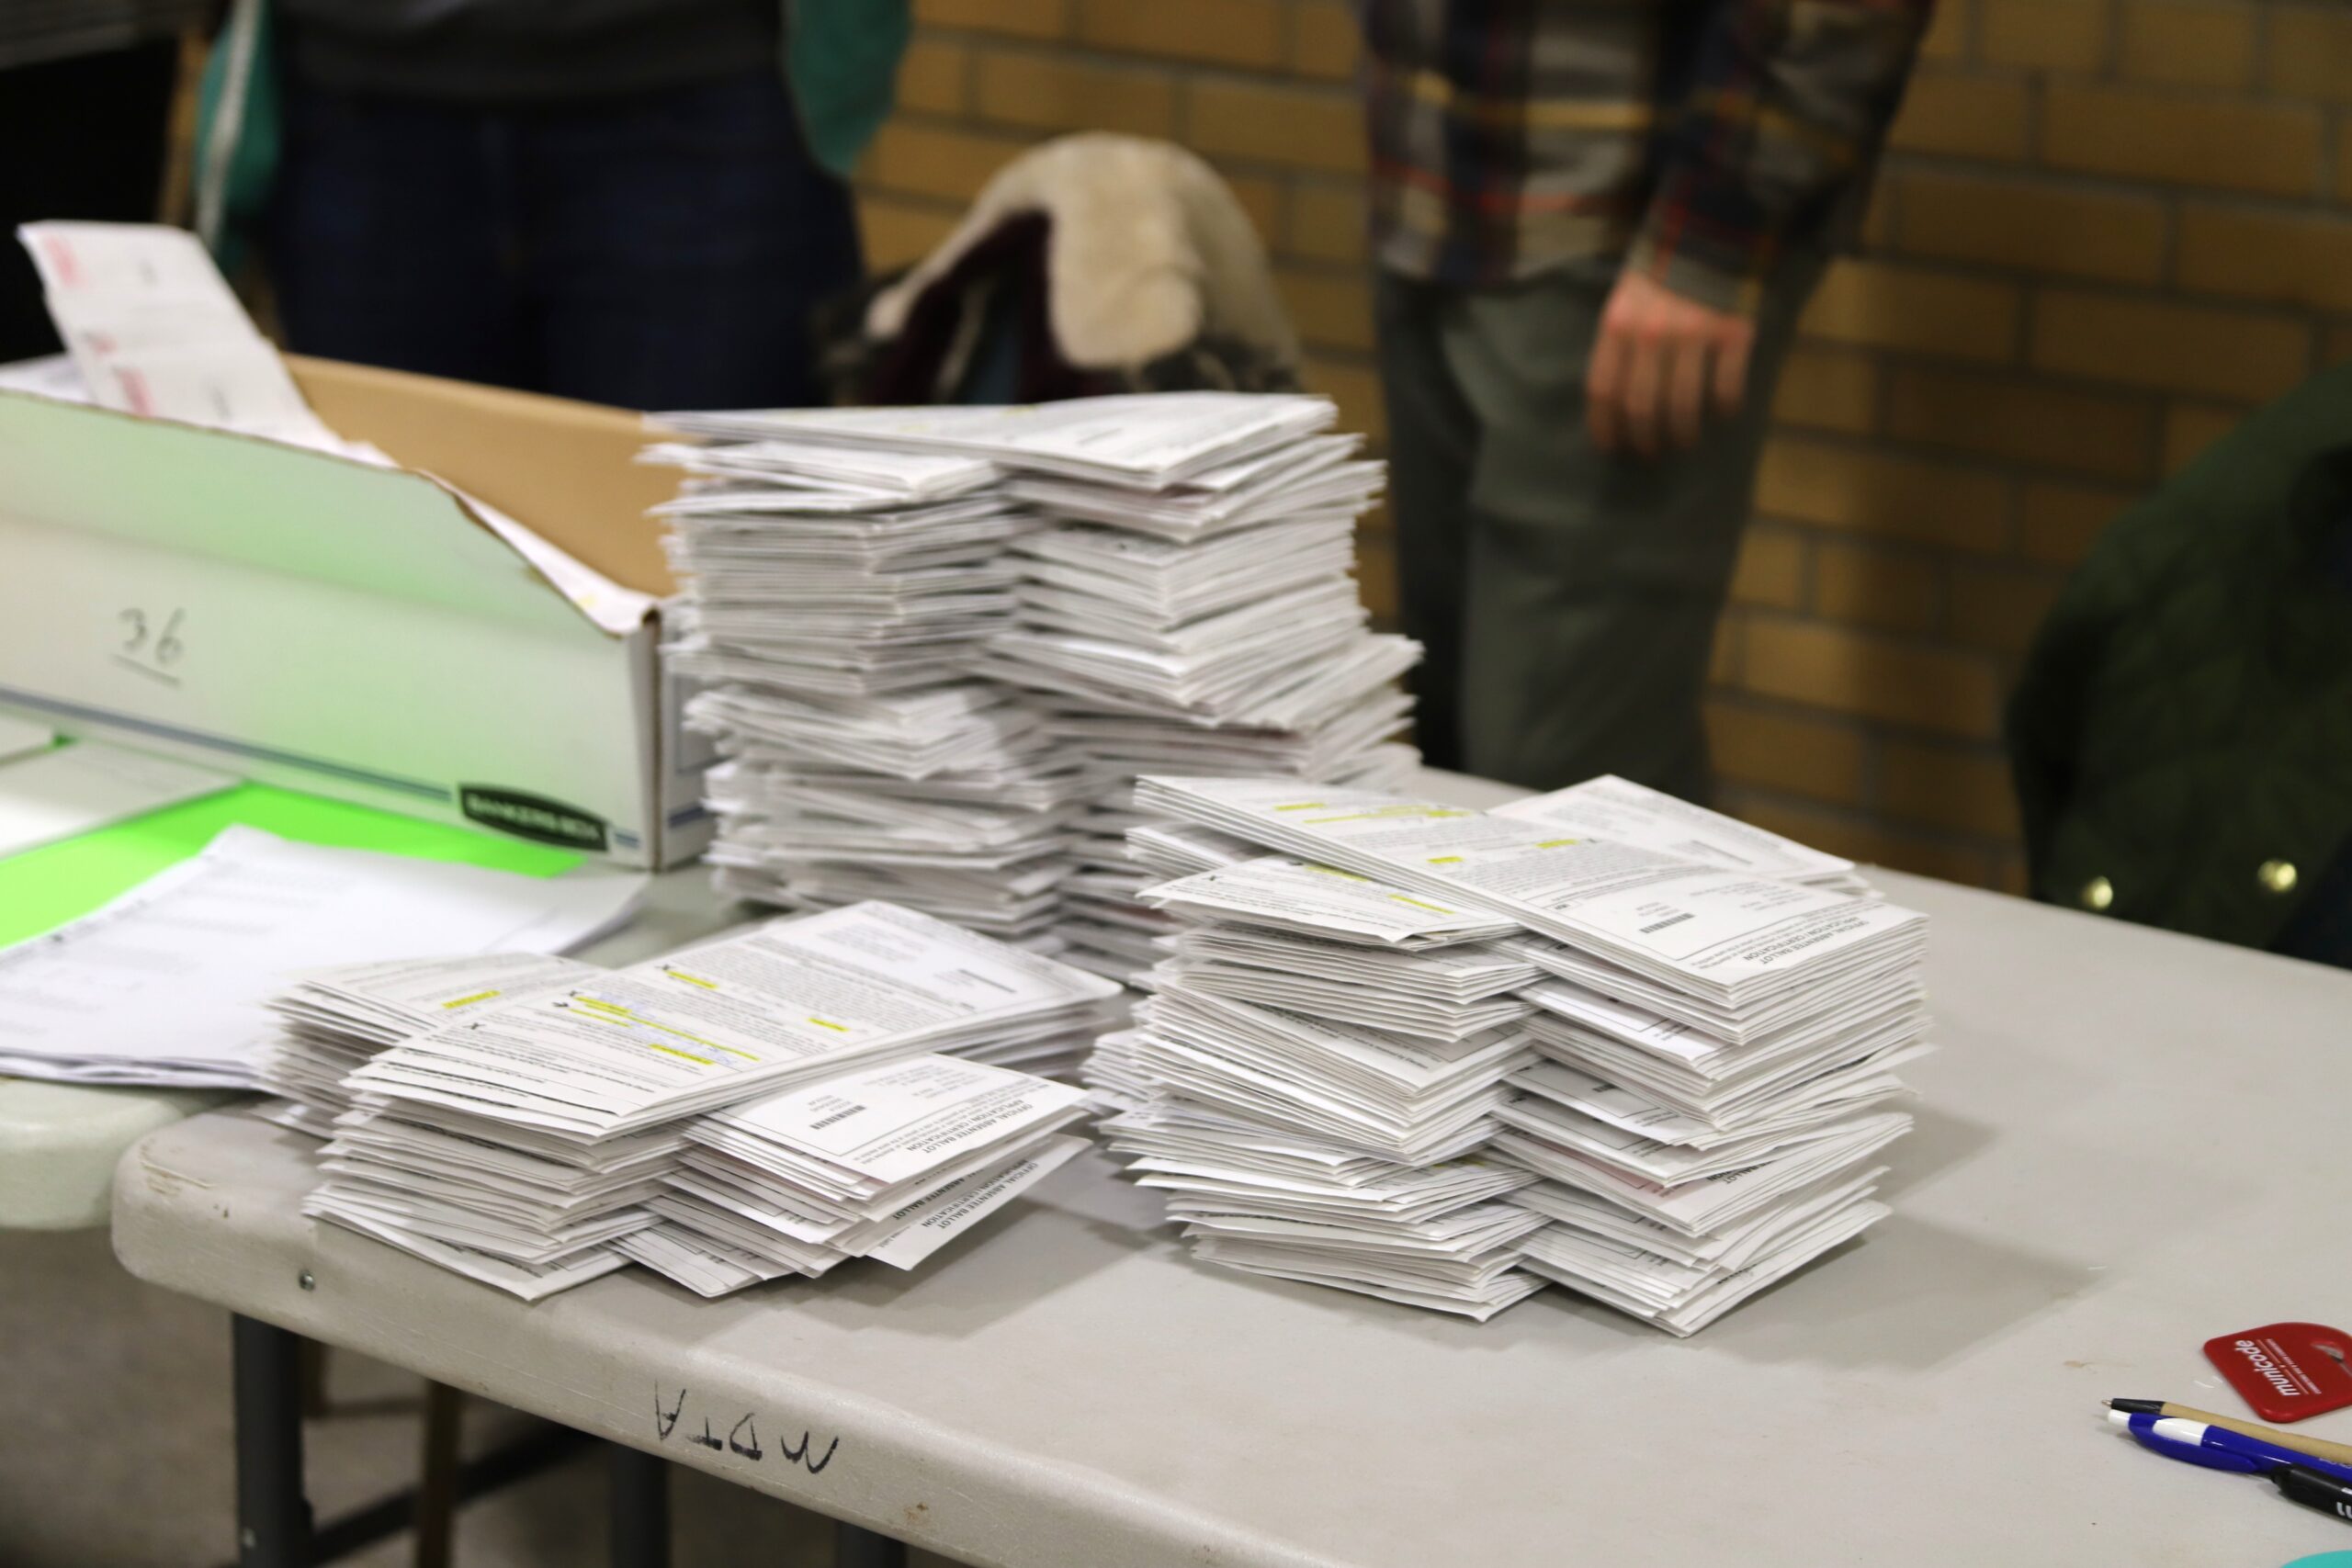 Stacks of absentee ballots wait to be counted at Mendota Elementary School on Madison's north side on Nov. 3, 2020